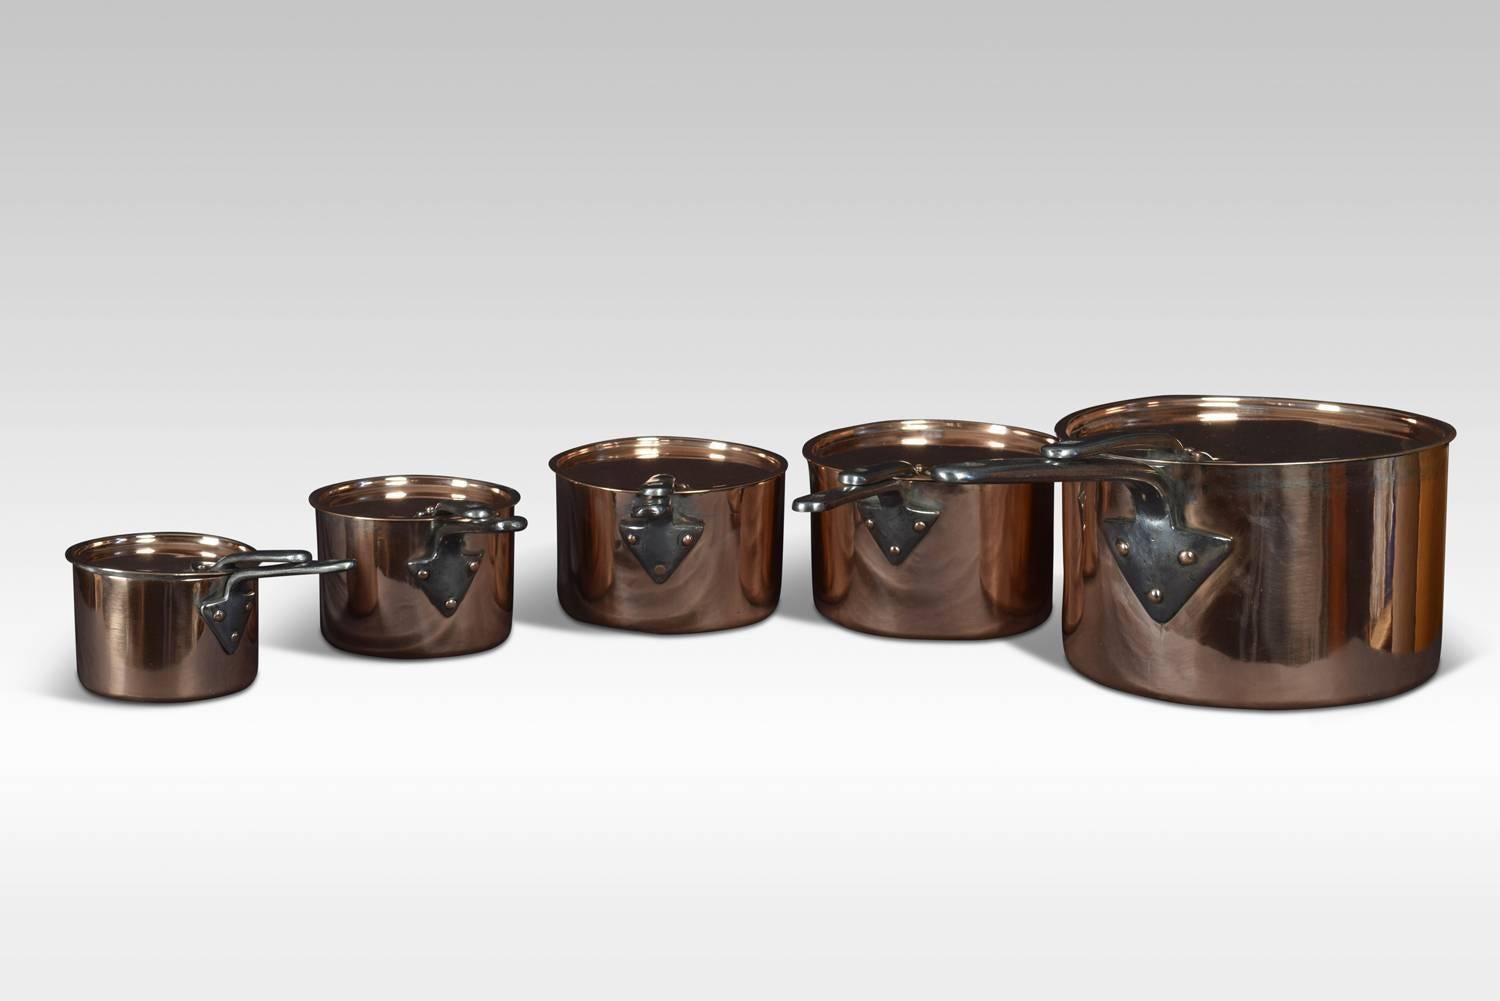 Late 19th century graduated set of five Victorian copper pans and lids with conforming iron handles. On an associated black-painted iron stand.
Dimensions:
Height 40.5 inches
Width 14 inches
Depth 14 inches.